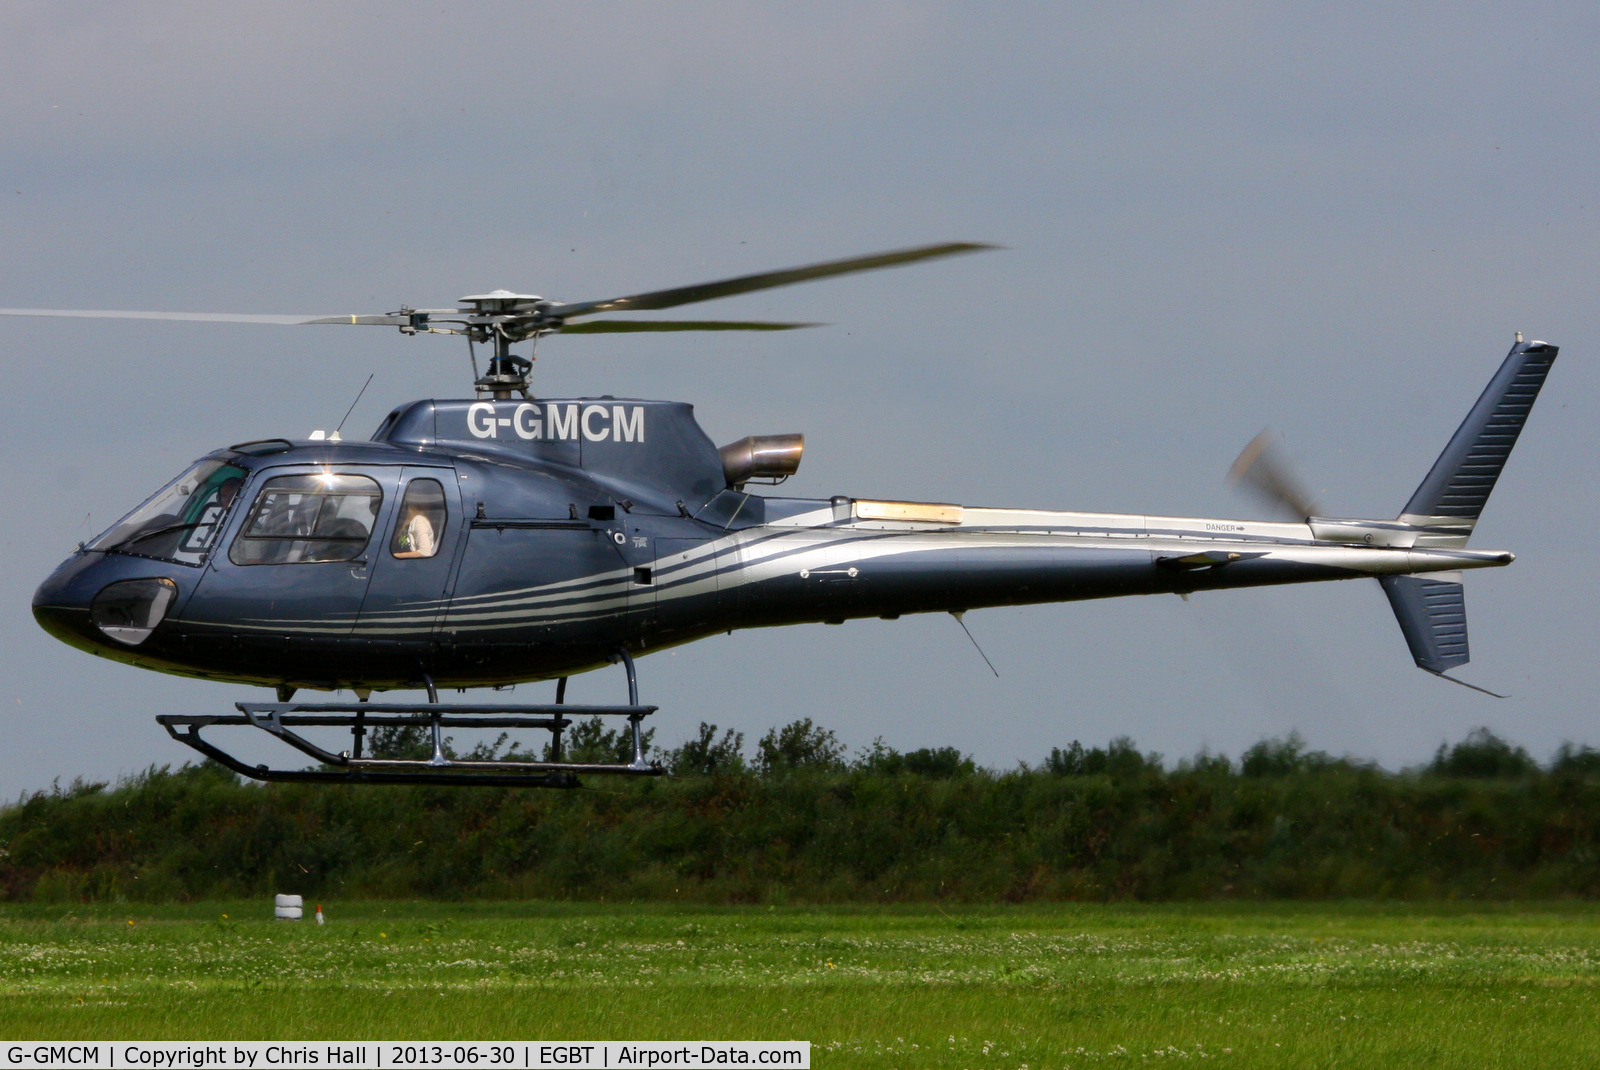 G-GMCM, 2008 Eurocopter AS-350B-3 Ecureuil Ecureuil C/N 4576, being used for ferrying race fans to the British F1 Grand Prix at Silverstone